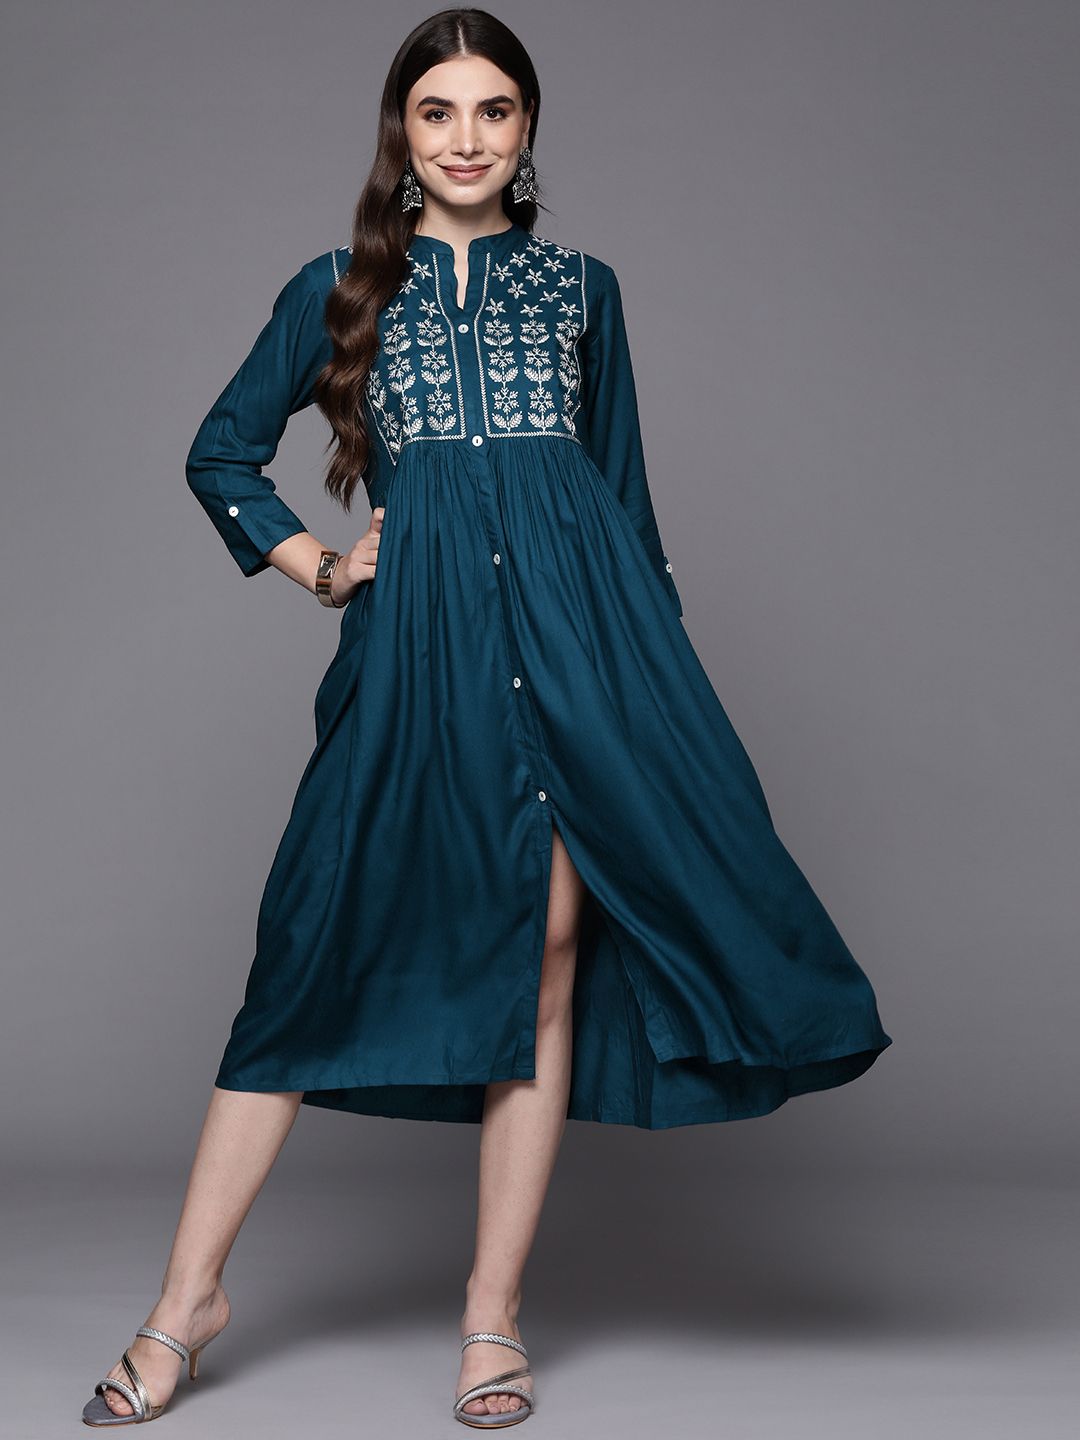 Indo Era Teal Floral Embroidered Ethnic A-Line Midi Dress Price in India